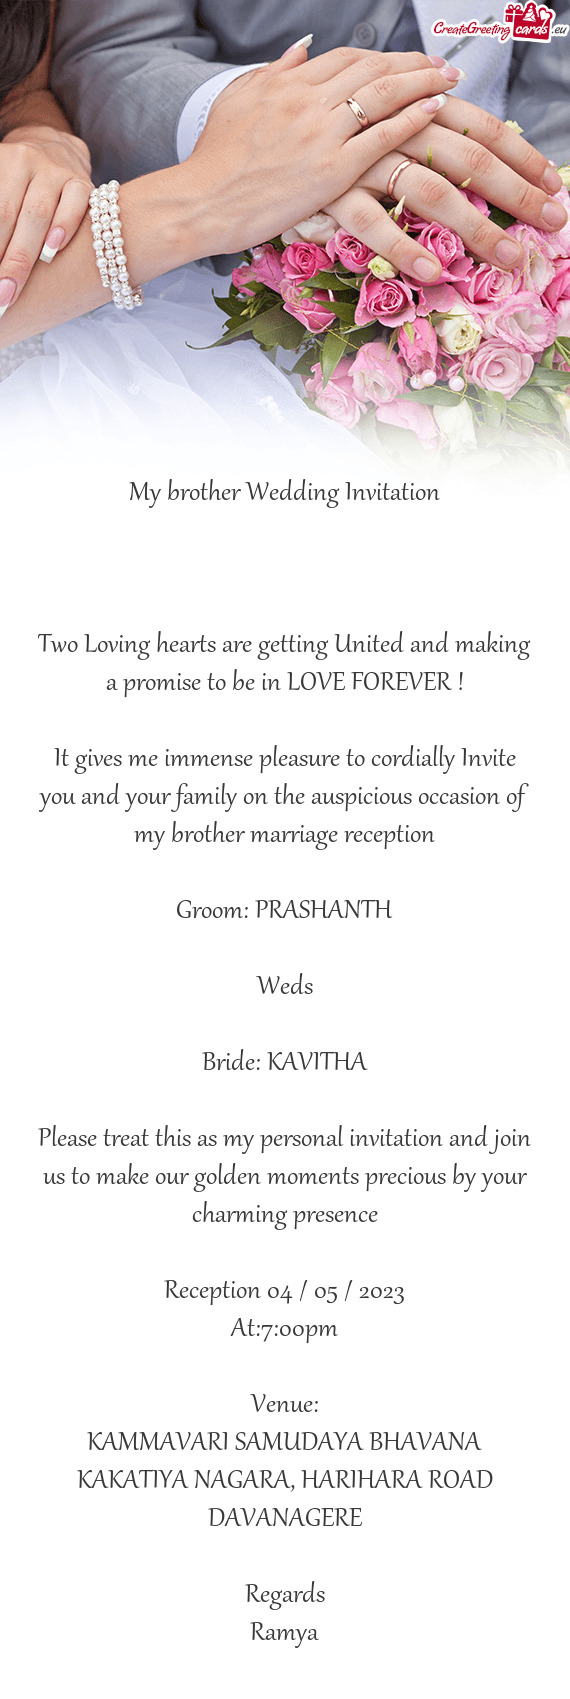 In LOVE FOREVER ! It gives me immense pleasure to cordially Invite you and your family on the au